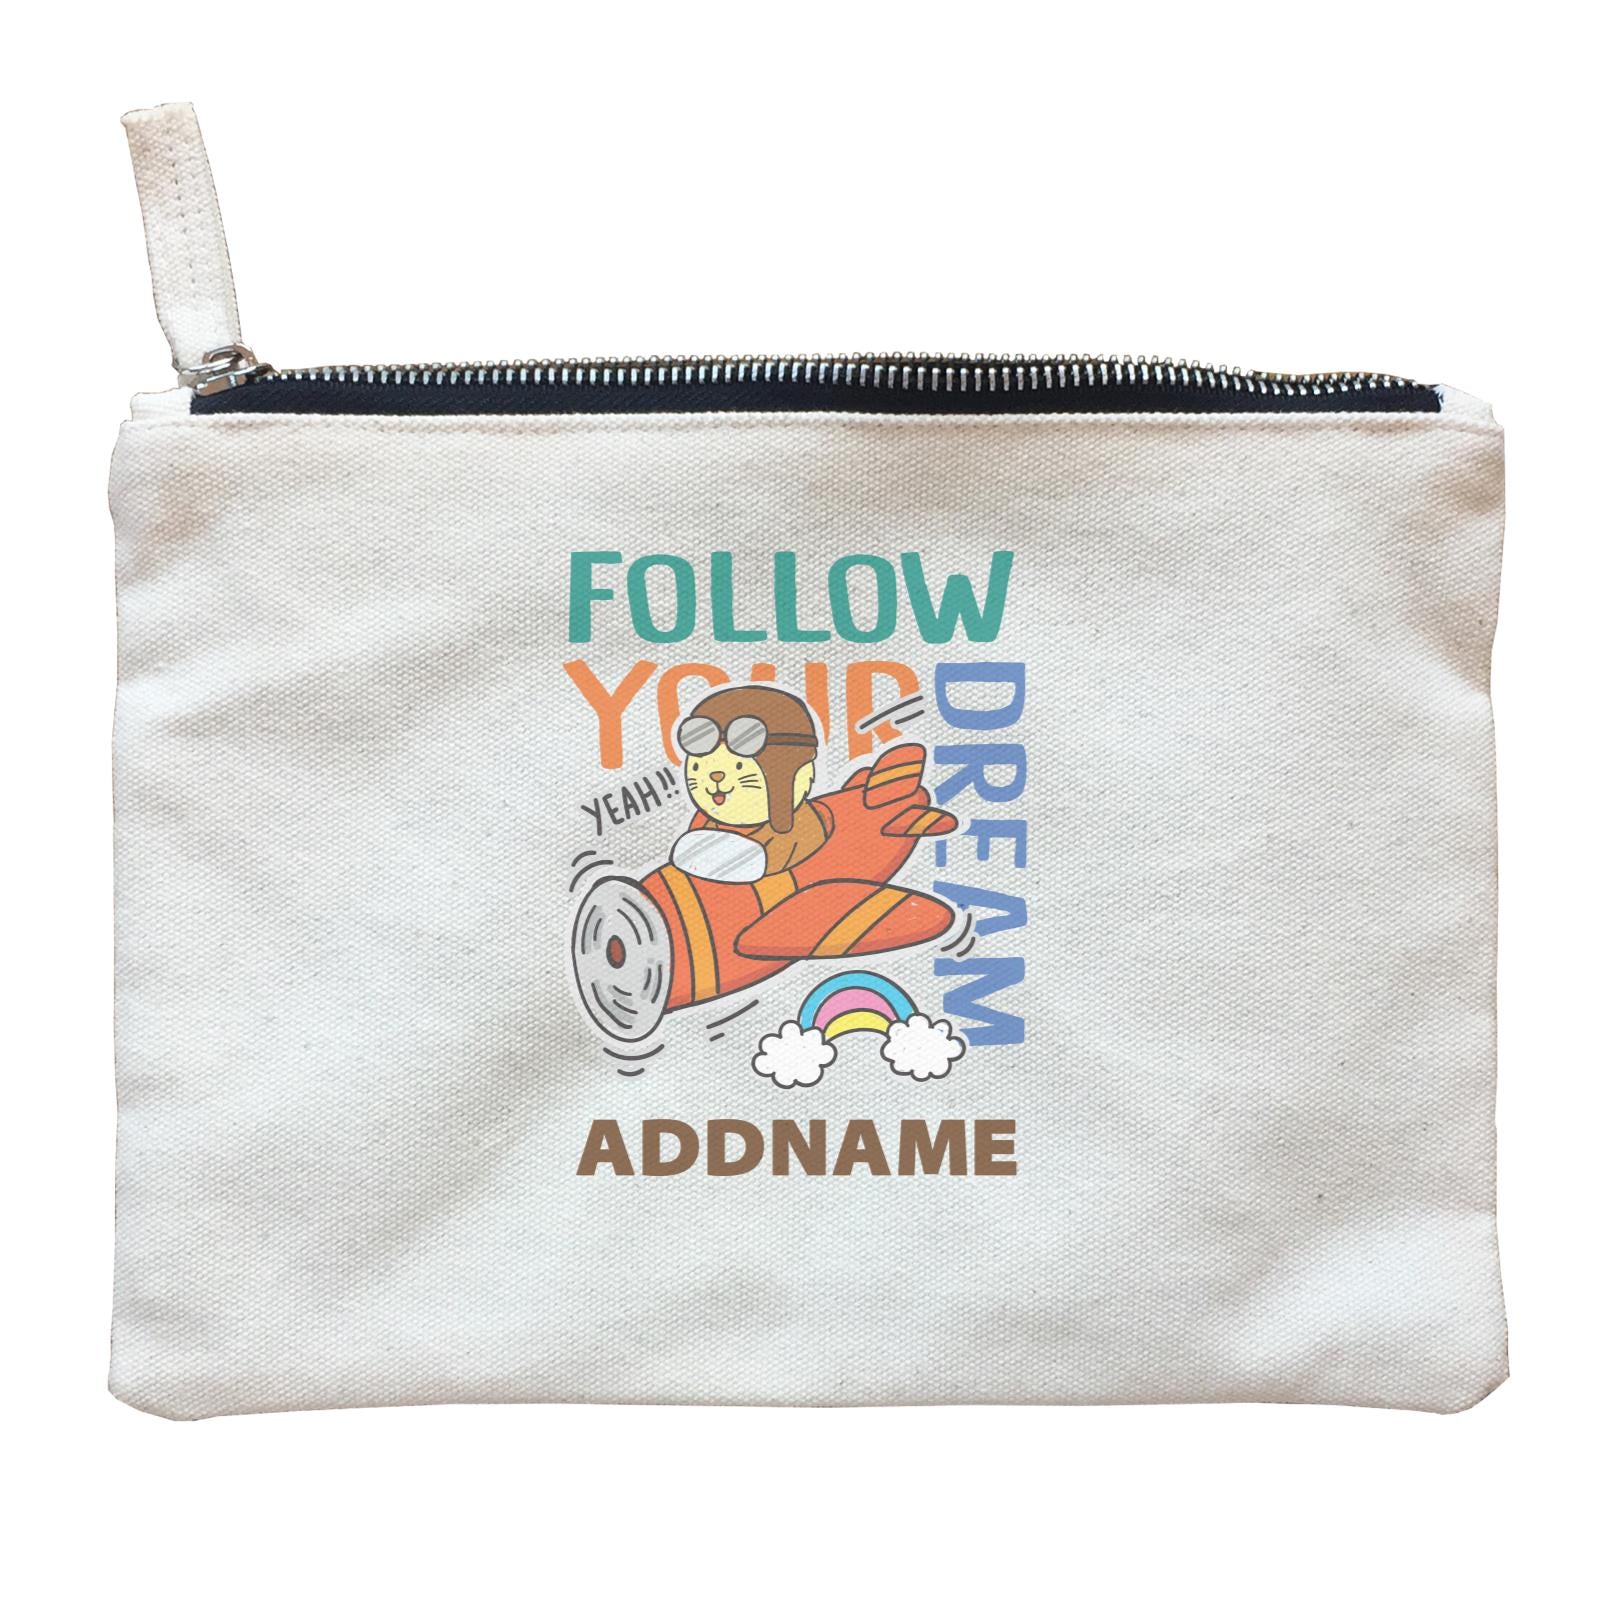 Cool Cute Animals Cats Follow Your Dream Addname Zipper Pouch